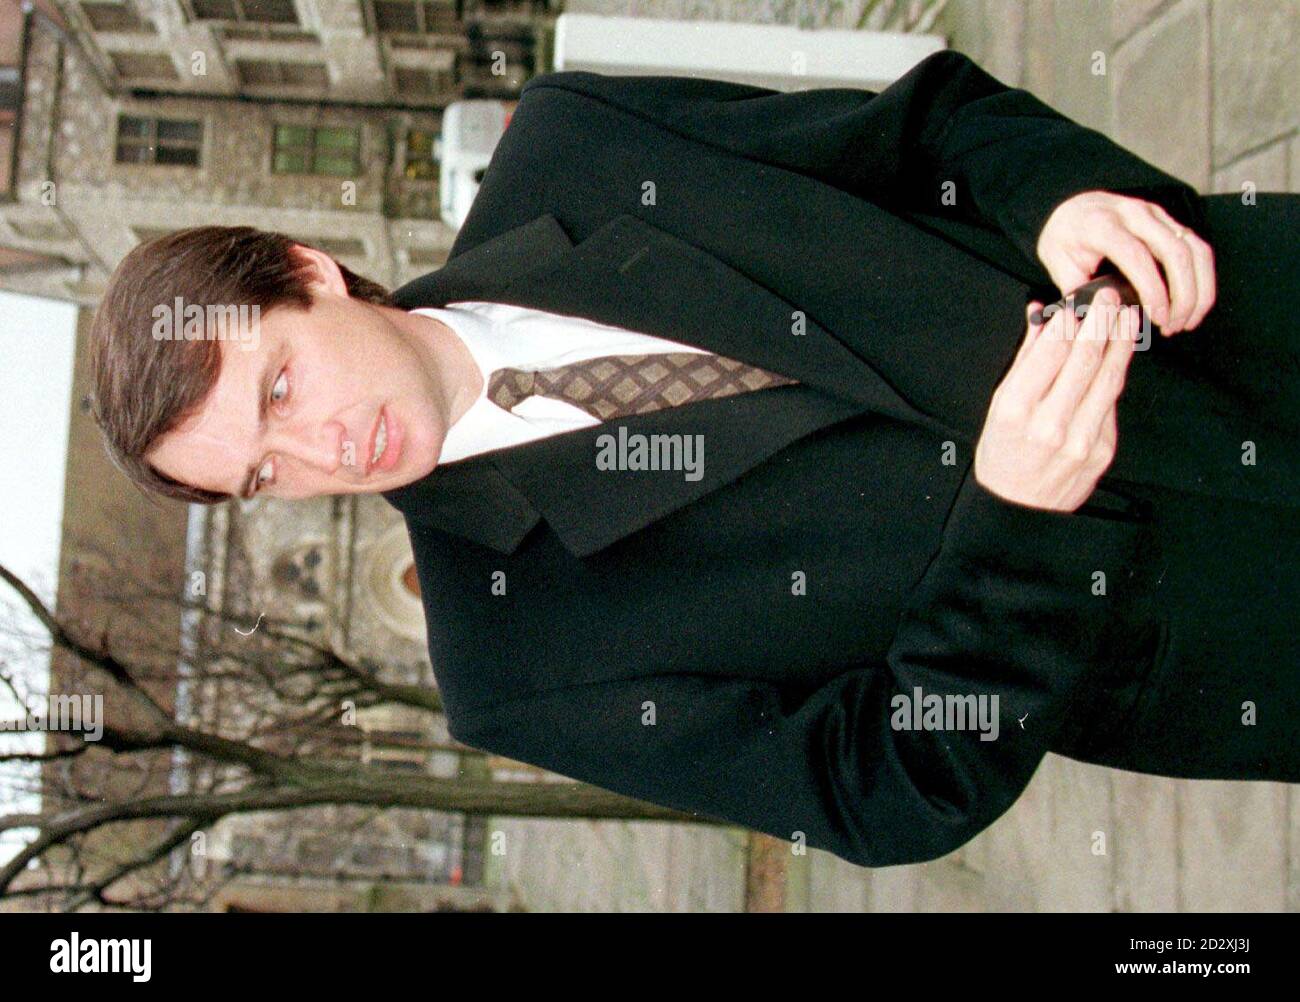 Former footballer Alan Hansen, arriving at Winchester Crown Court to give evidence at the trial of Bruce Grobbelaar, Hans Segers, John Fashanu, and businessman Heng Suan Lim.  * Bruce Grobbelaar, 39, the former Liverpool and Southampton goalkeeper, former Wimbledon keeper Hans Segers, 35, former Aston Villa and Wimbledon striker John Fashanu, 34, and Malaysian businessman Heng Suan Lim, 31, deny conspiring to give and accept corrupt payments to influence or attempt to influence the outcome of football matches.  Stock Photo